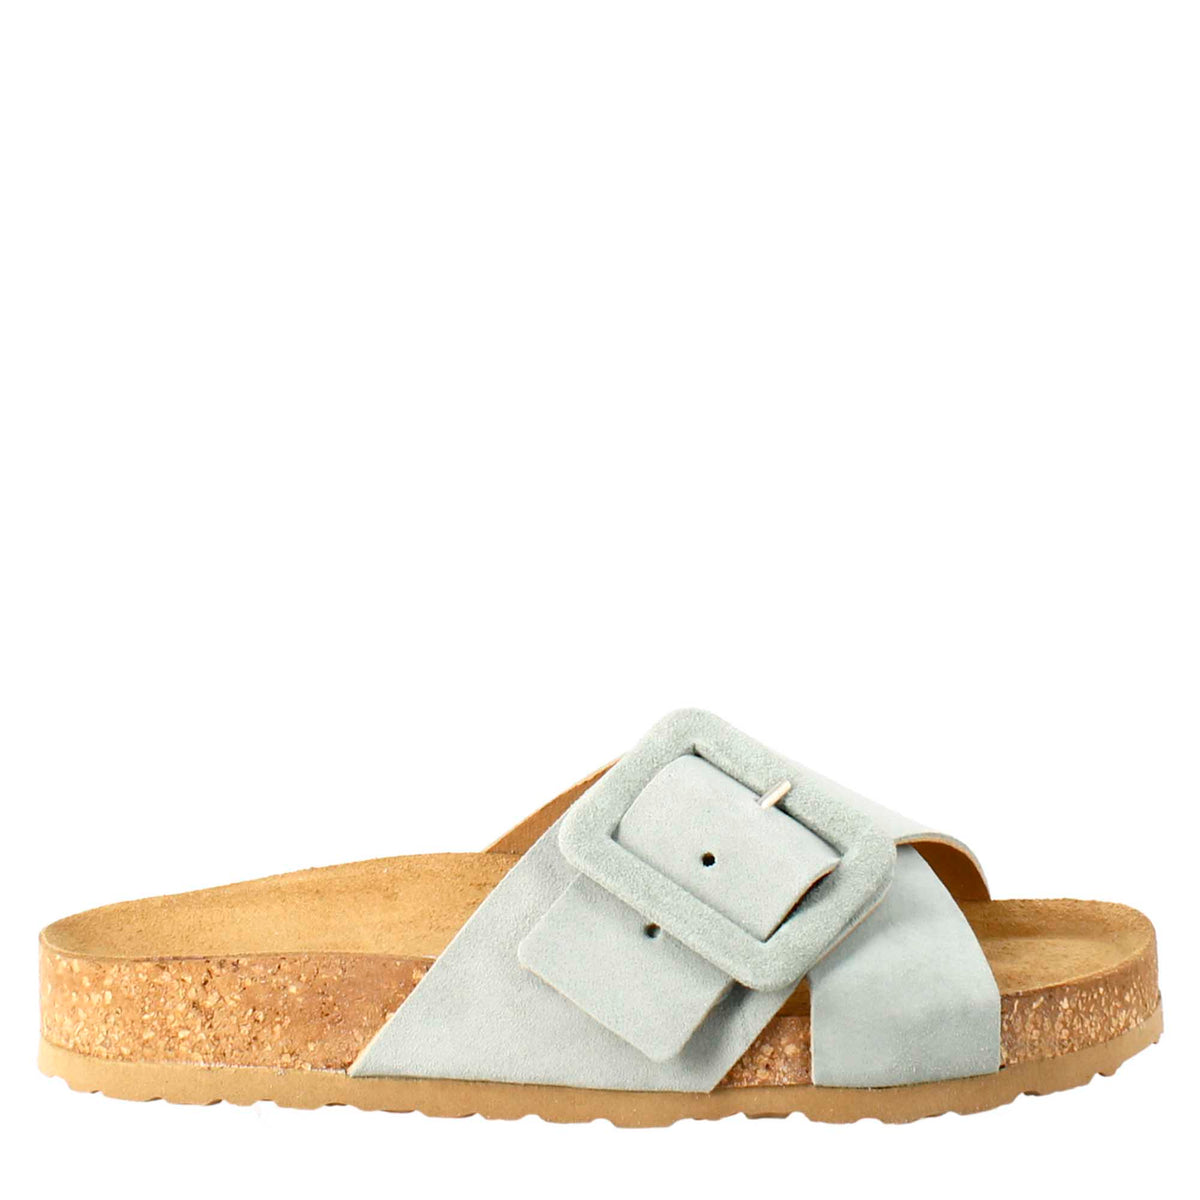 Woman's double band sandal and buckle in green suede 